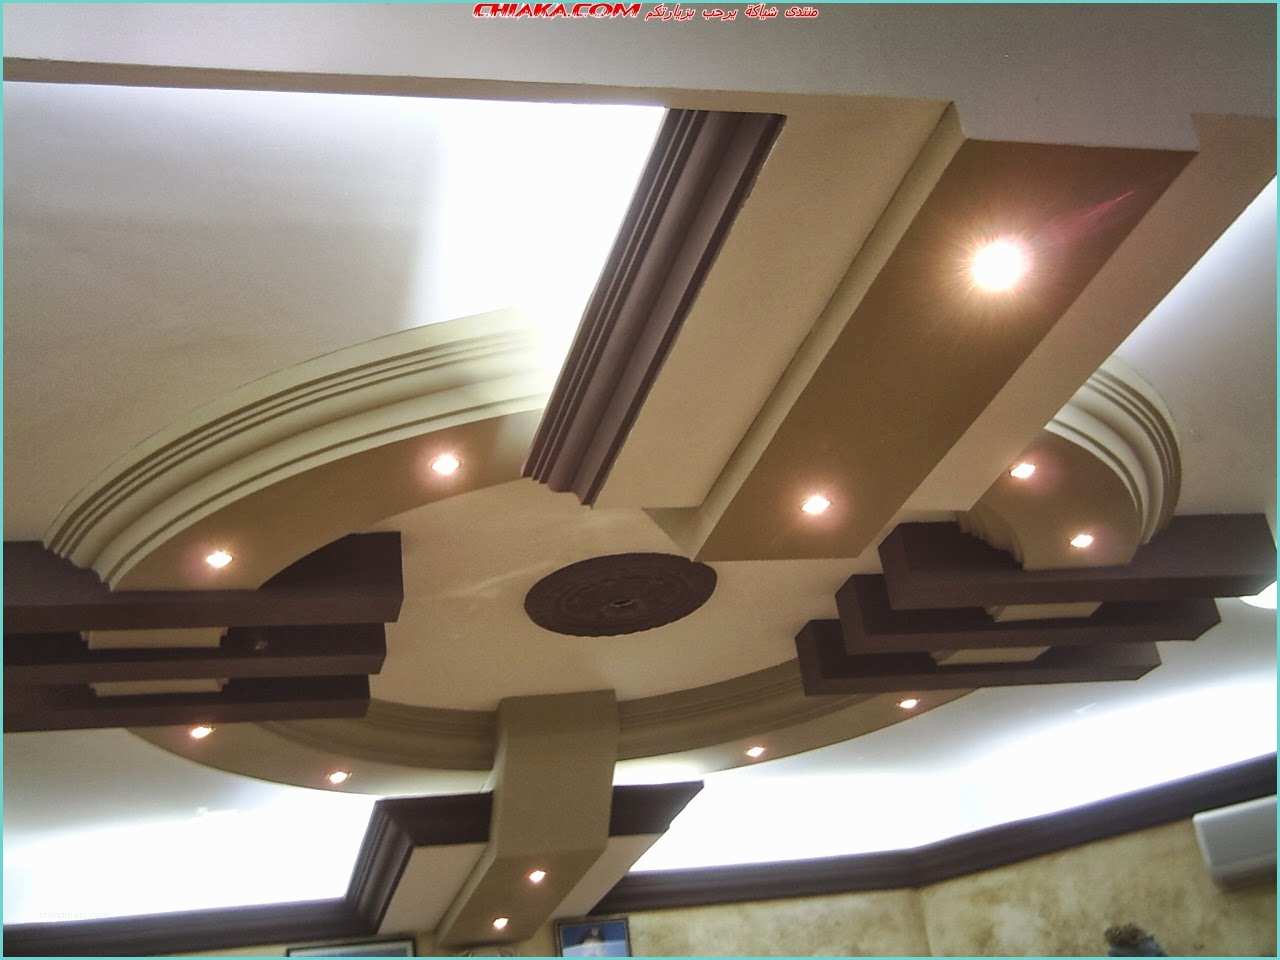 Design Of Pop On Roof Fall Ceiling Designs for Living Room Design Ideas